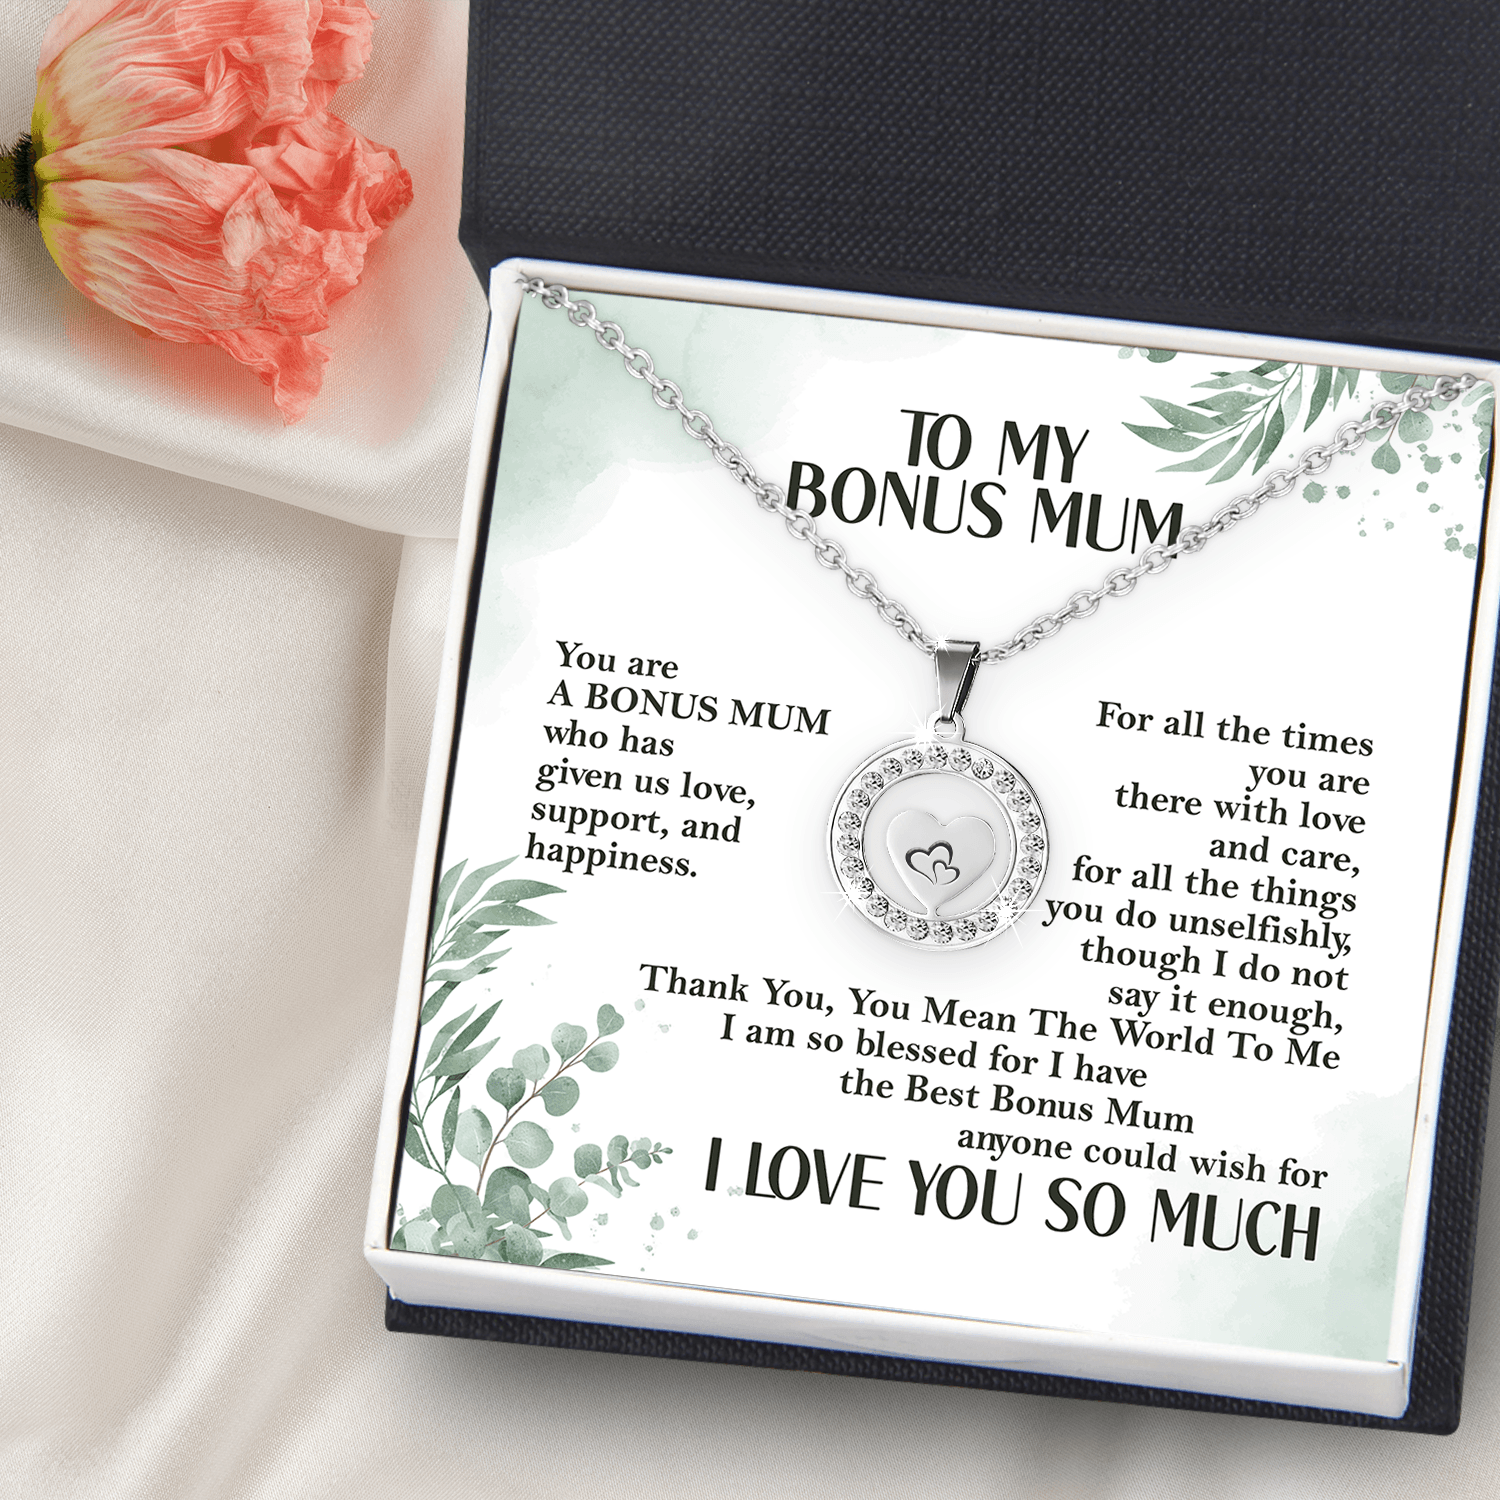 Circle Heart Necklace - Family - To My Bonus Mum - I Love You So Much - Augnod19002 - Gifts Holder